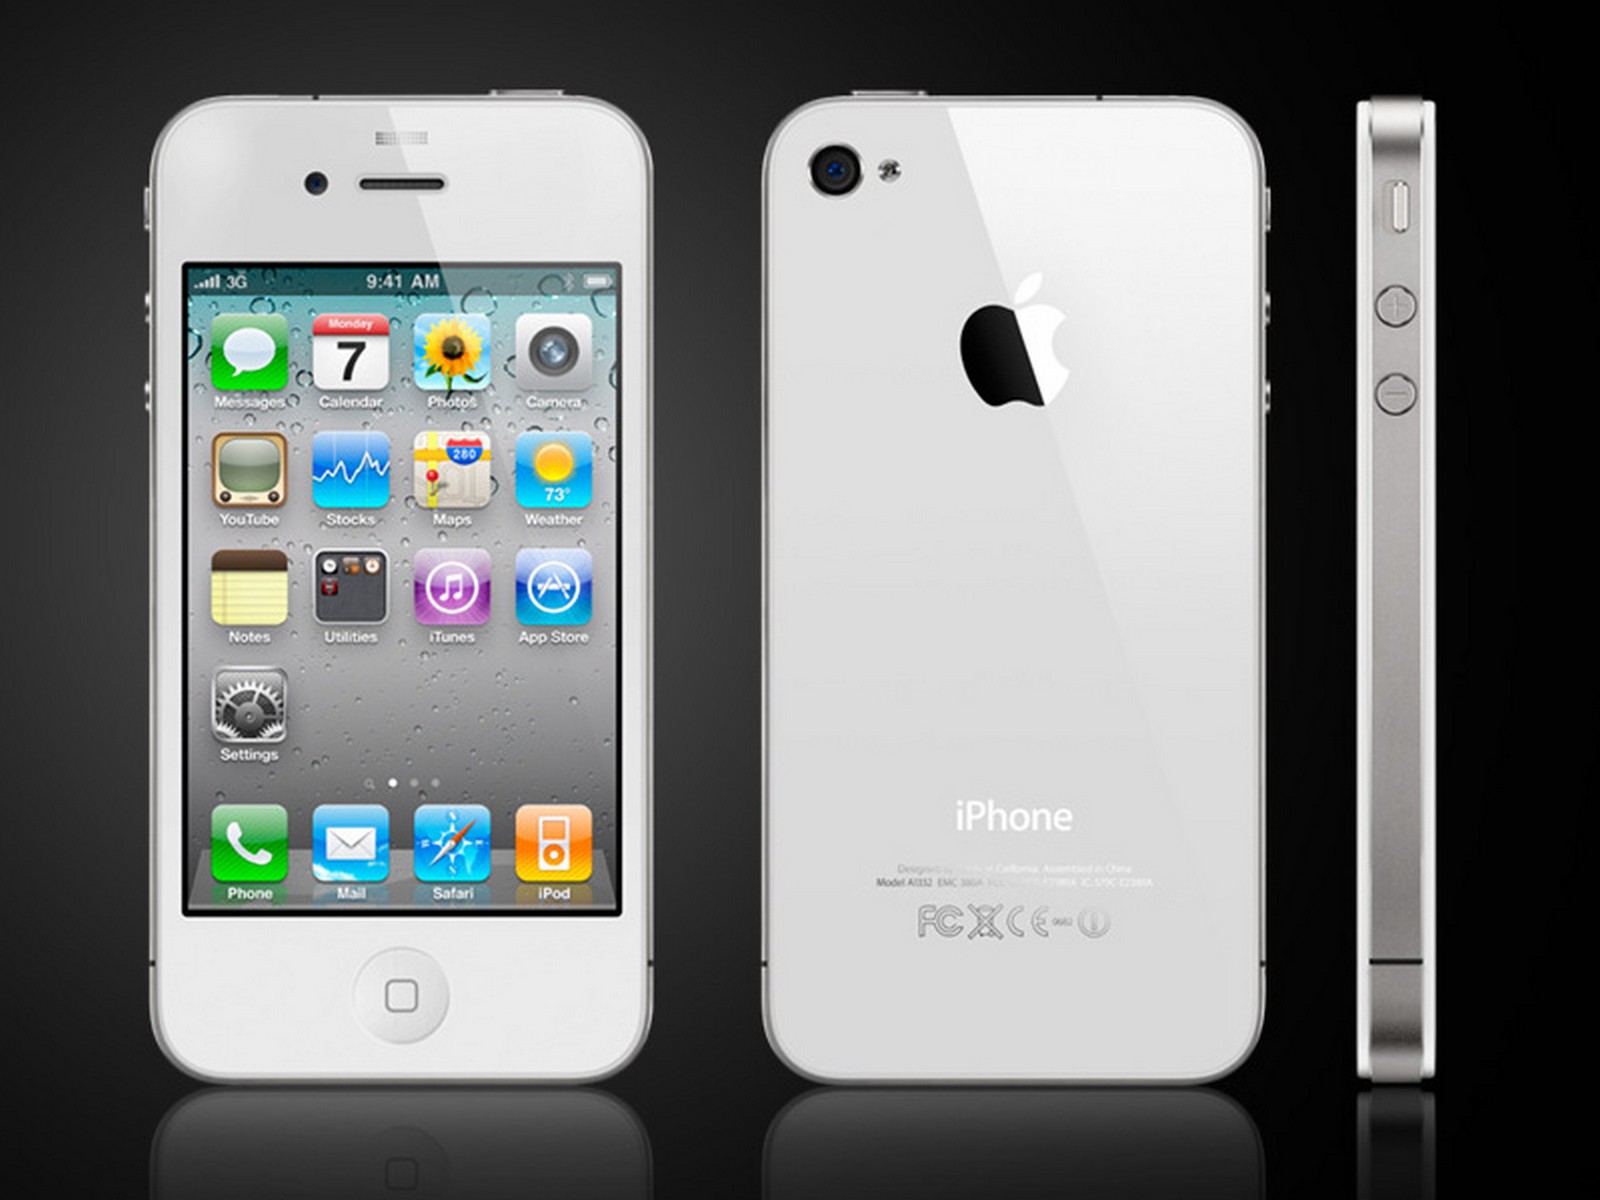 Buy (Refurbished) Apple iPhone 4S (16 GB Storage, White) - Superb Condition, Like New Online ...